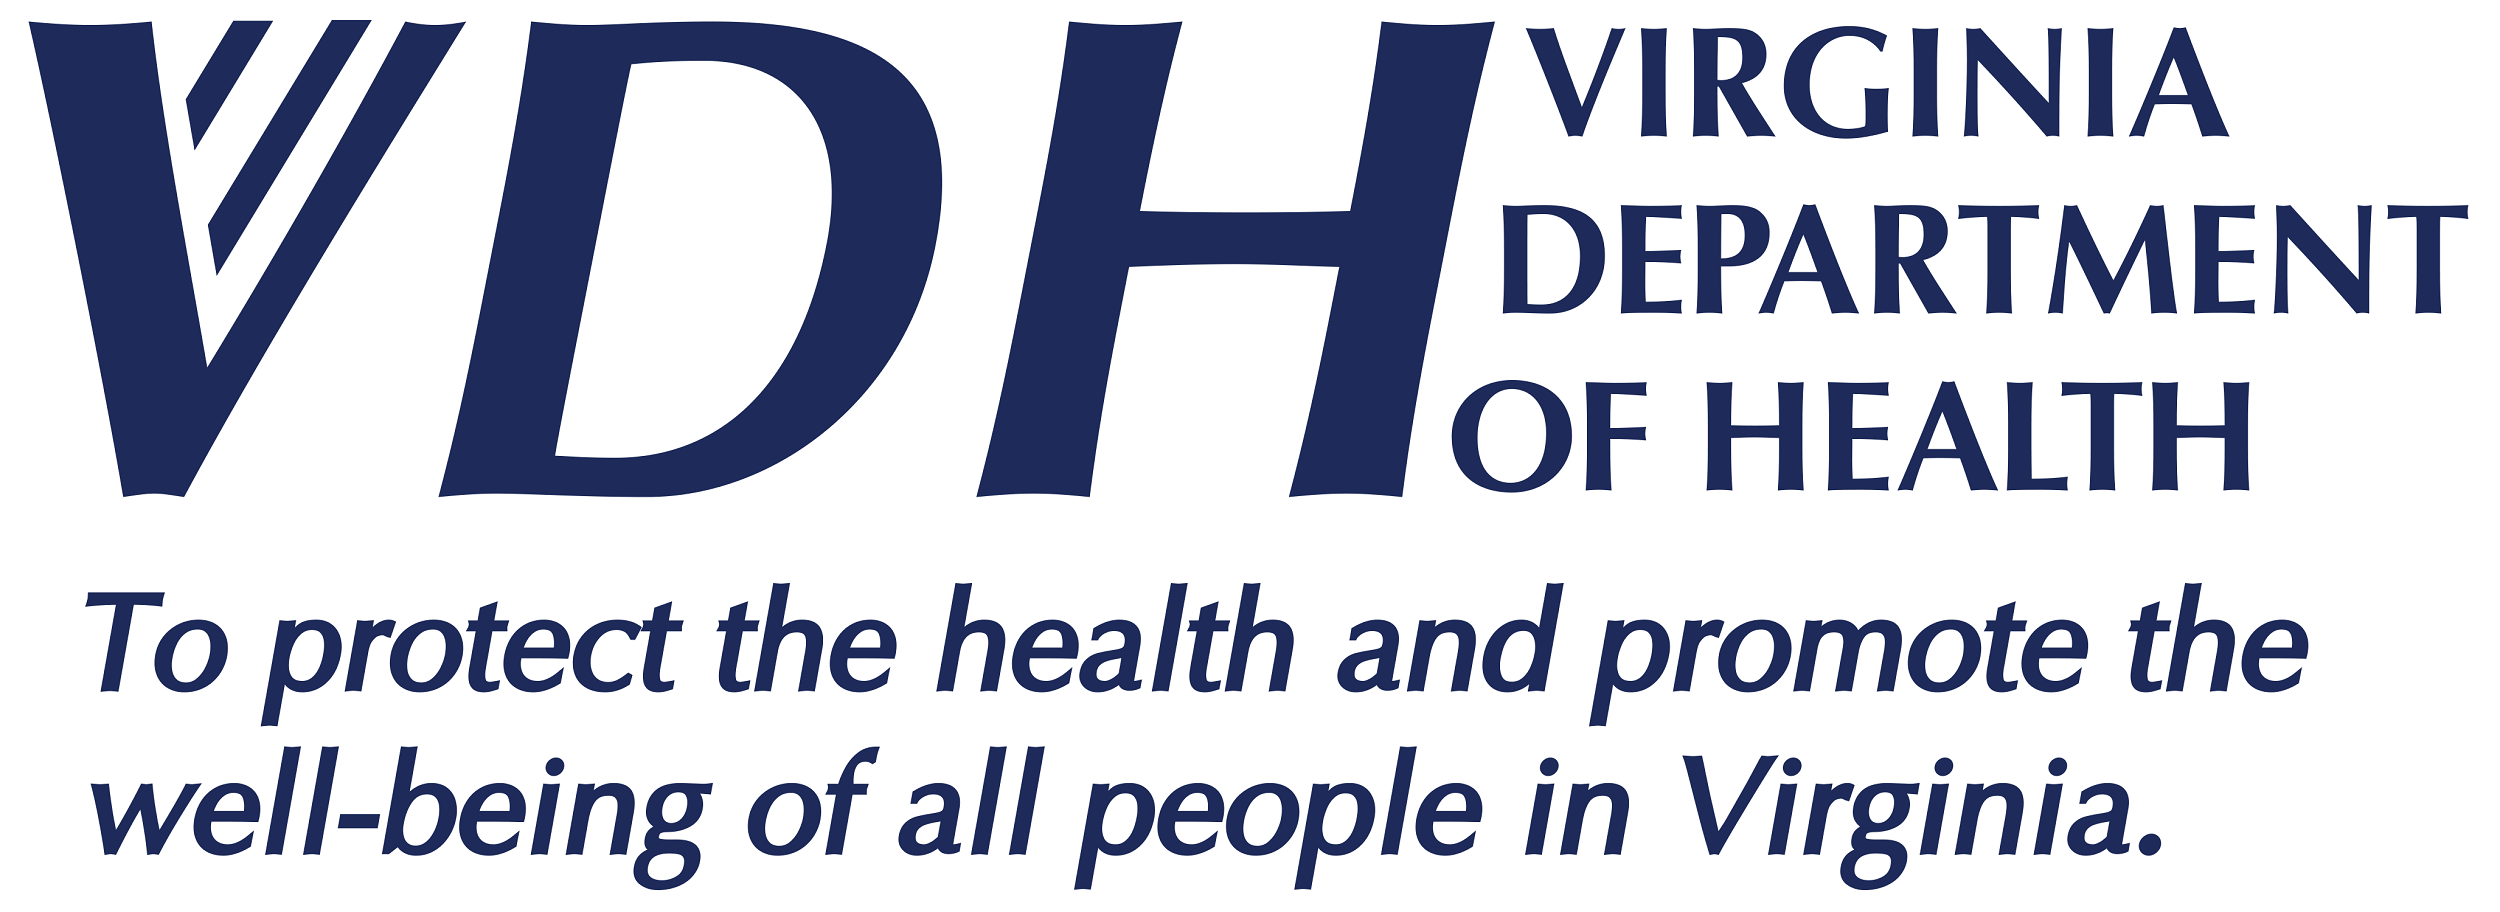 VDH Virginia Department of Health To protect the health and promote the well-being of all people in Virginia